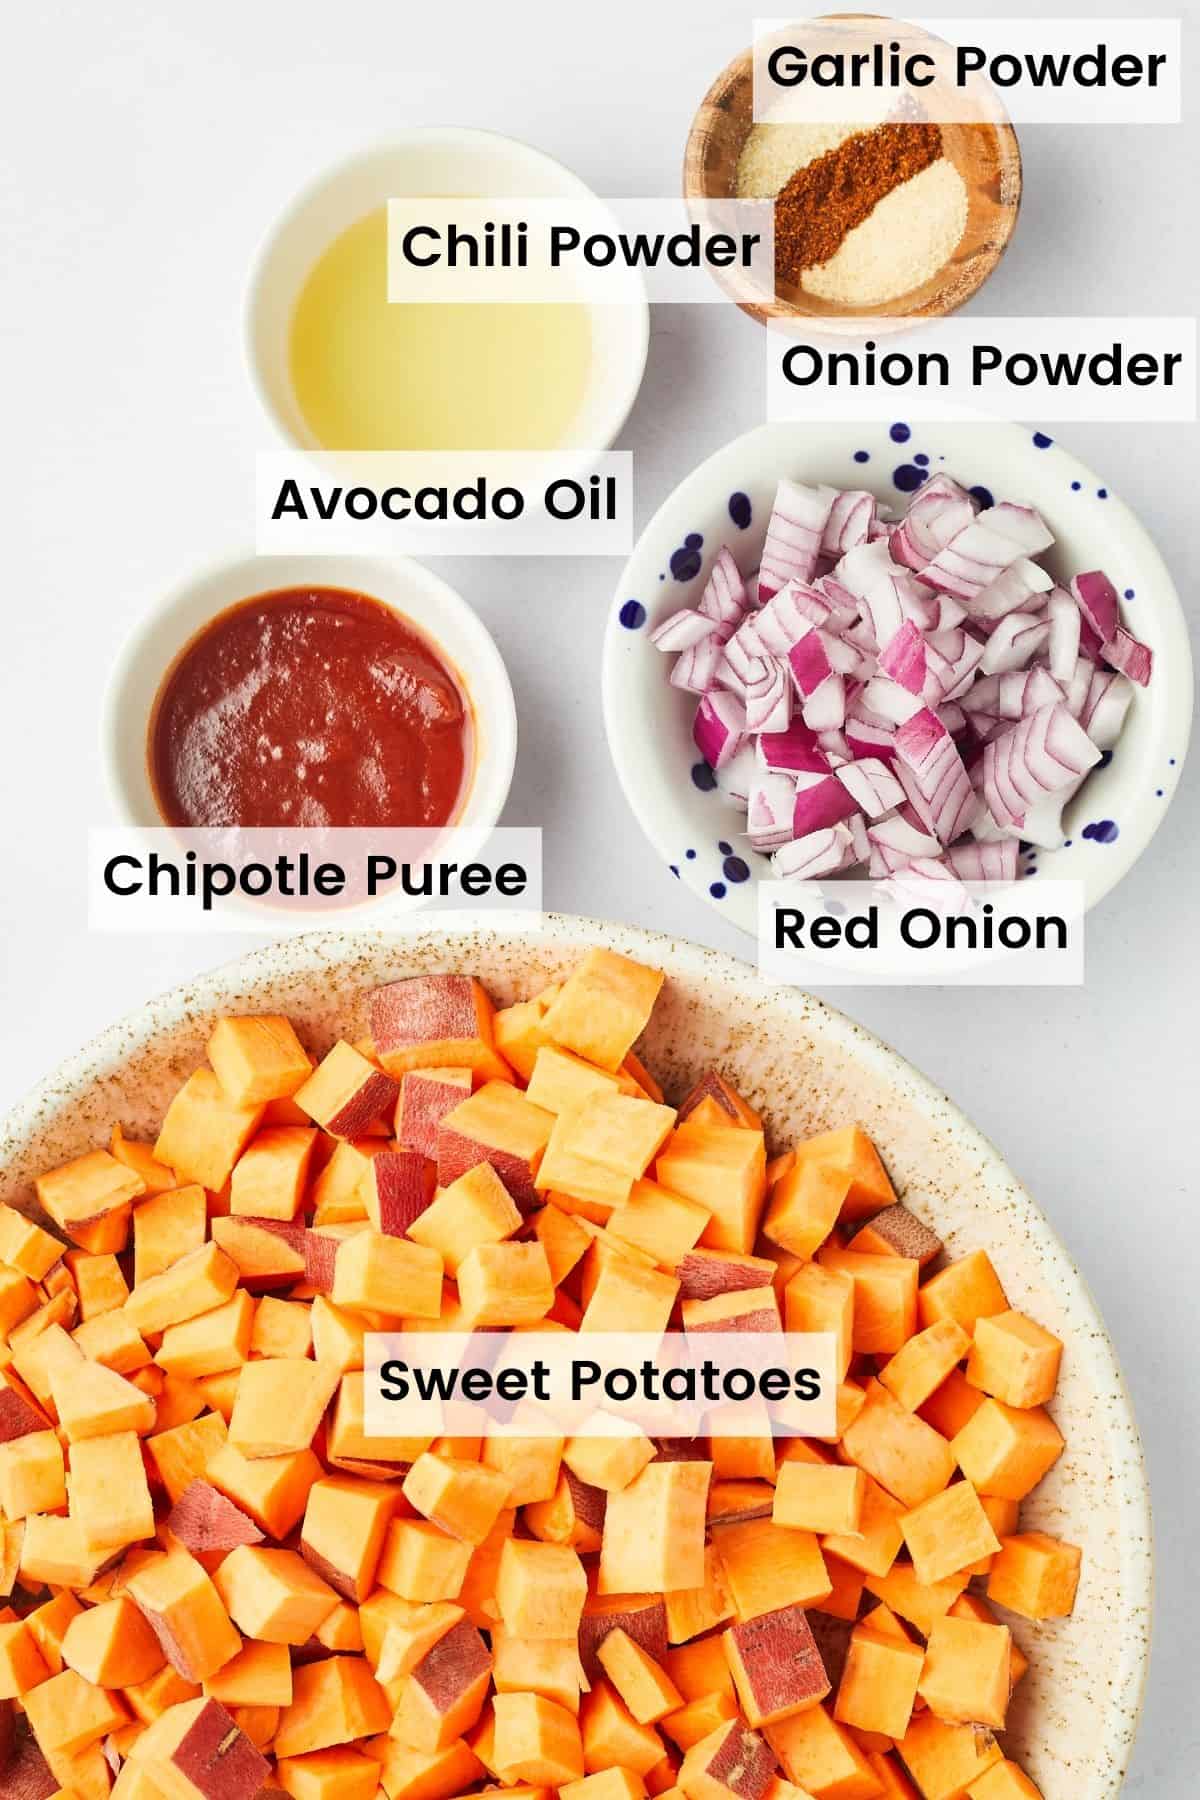 Ingredients for spicy air fryer sweet potato cubes are shown: sweet potatoes, red onion,, chipotles, onion powder, garlic powder, chile powder, avocado oil.